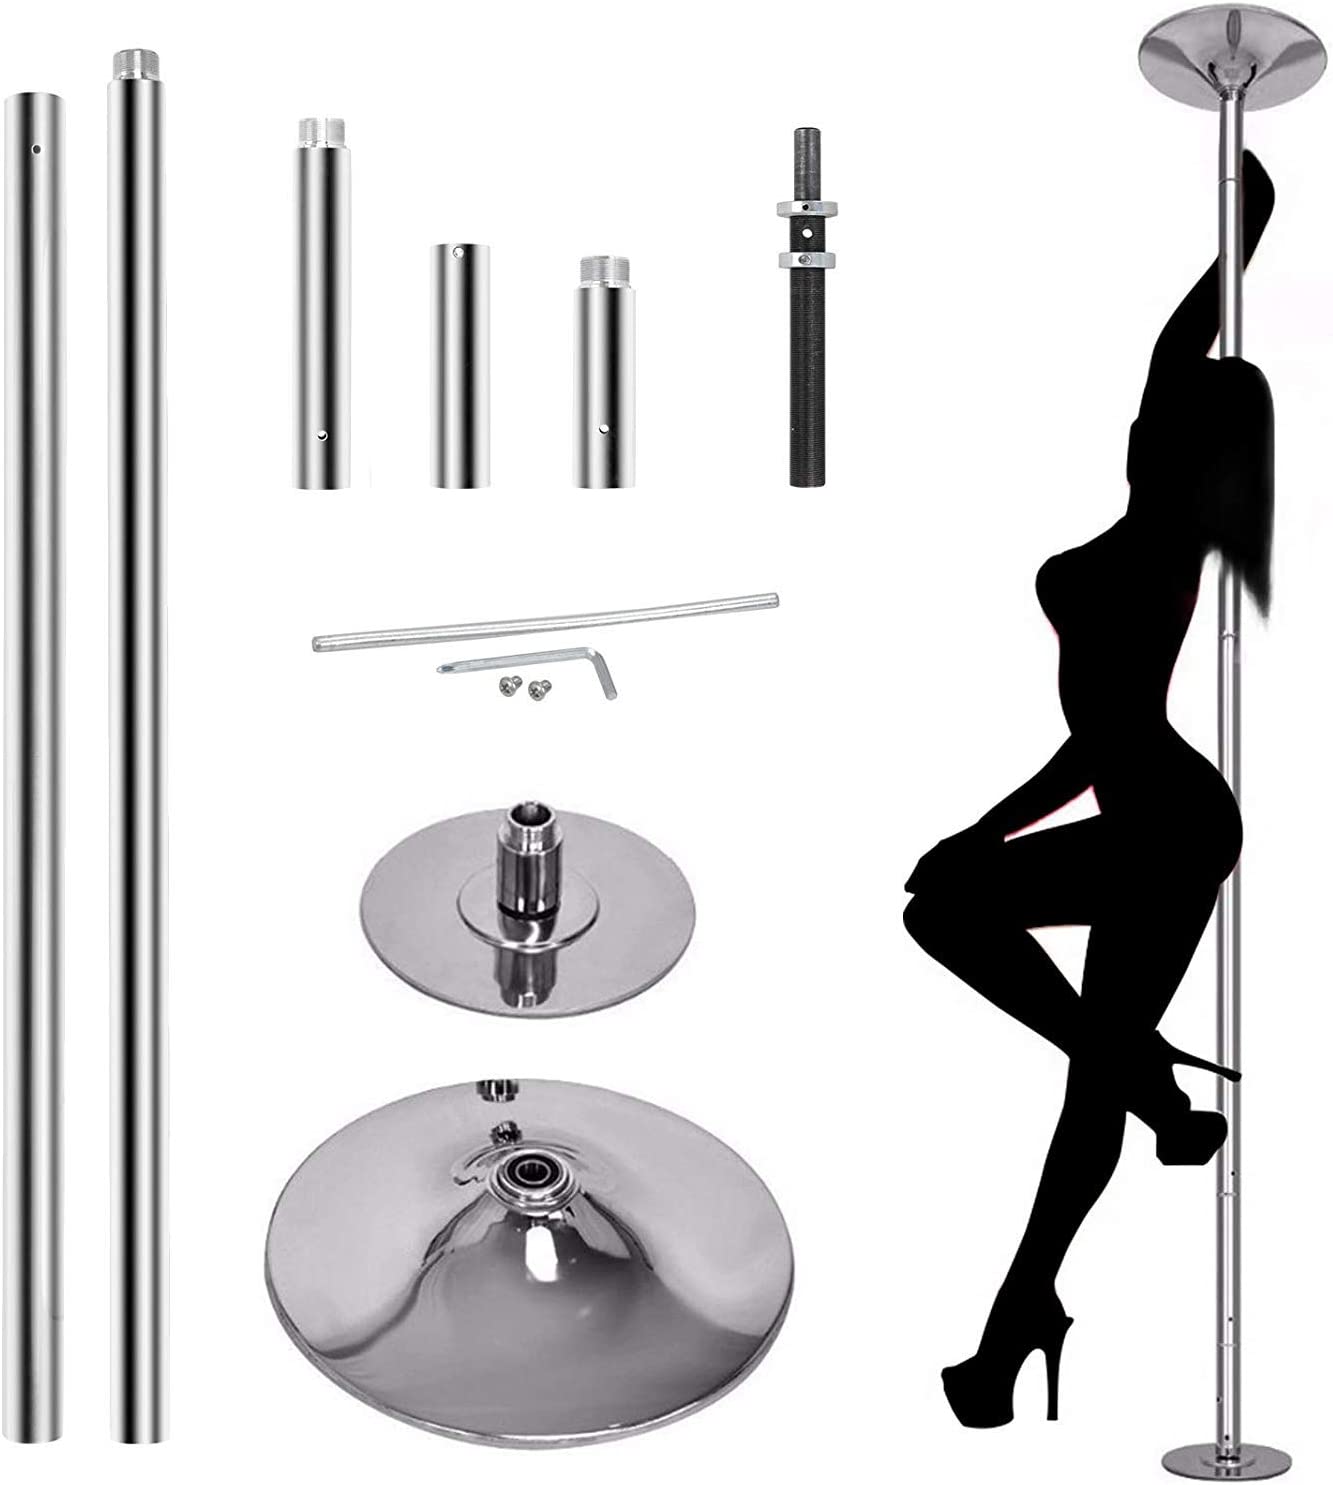 Portable Dancing Pole Kit Removable Stripper Pole for Home Apartment Spinning Dance Pole with Extension for Exercise,Club,Party,Pub,Pole Dancing Workout